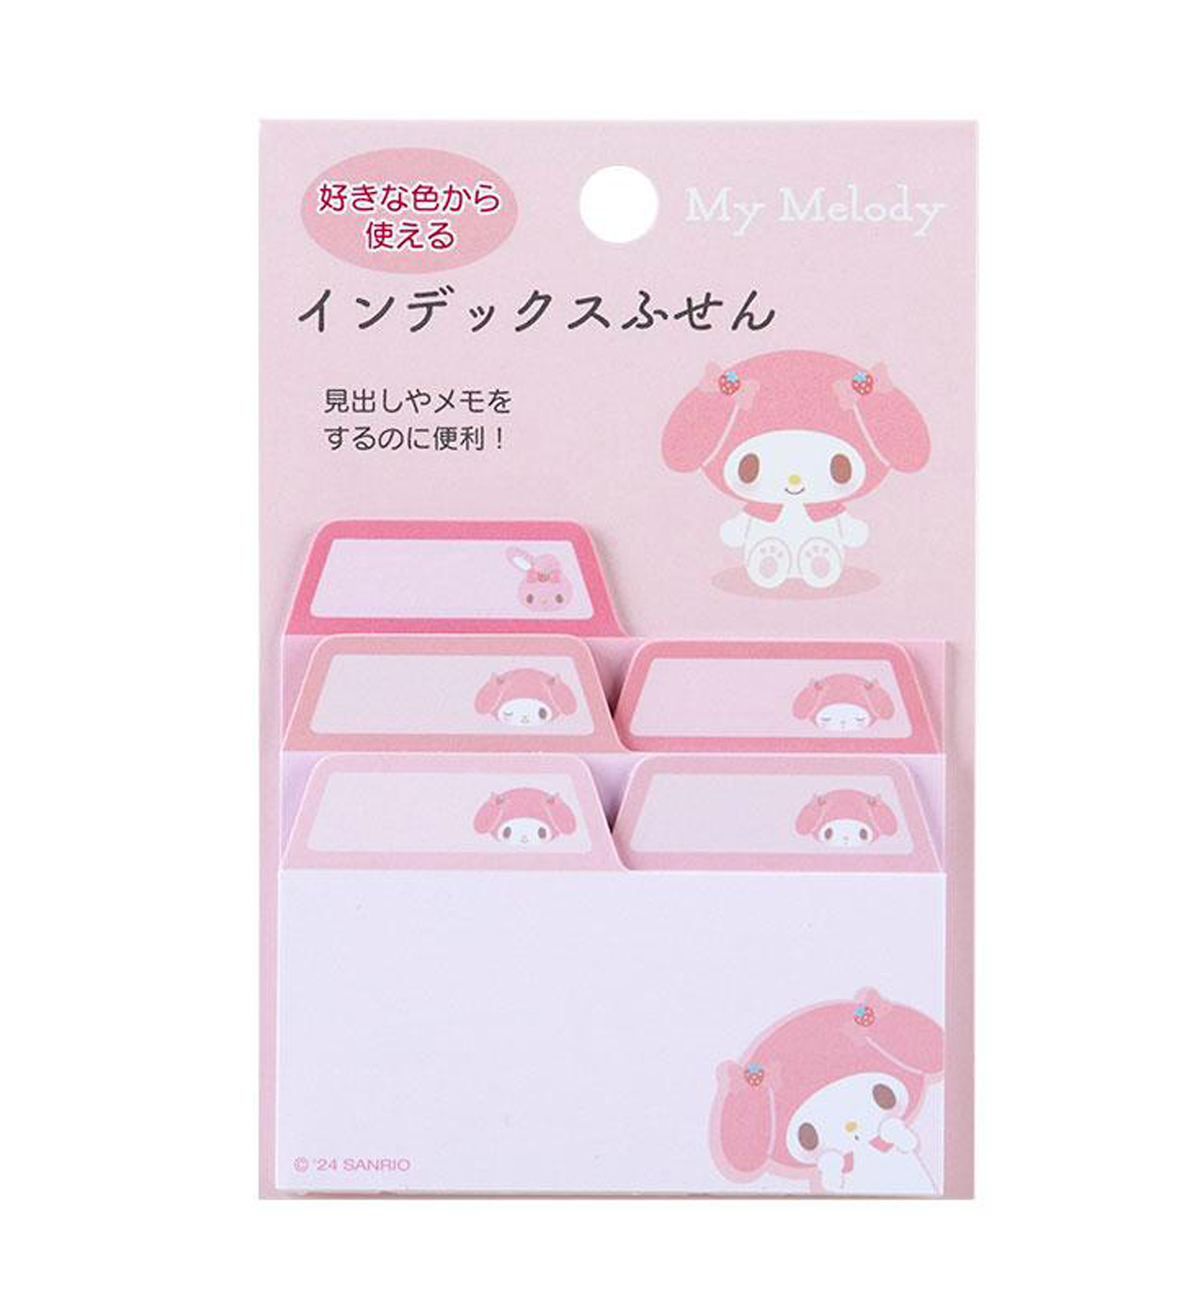 Sanrio Index Sticky Notes [My Melody]